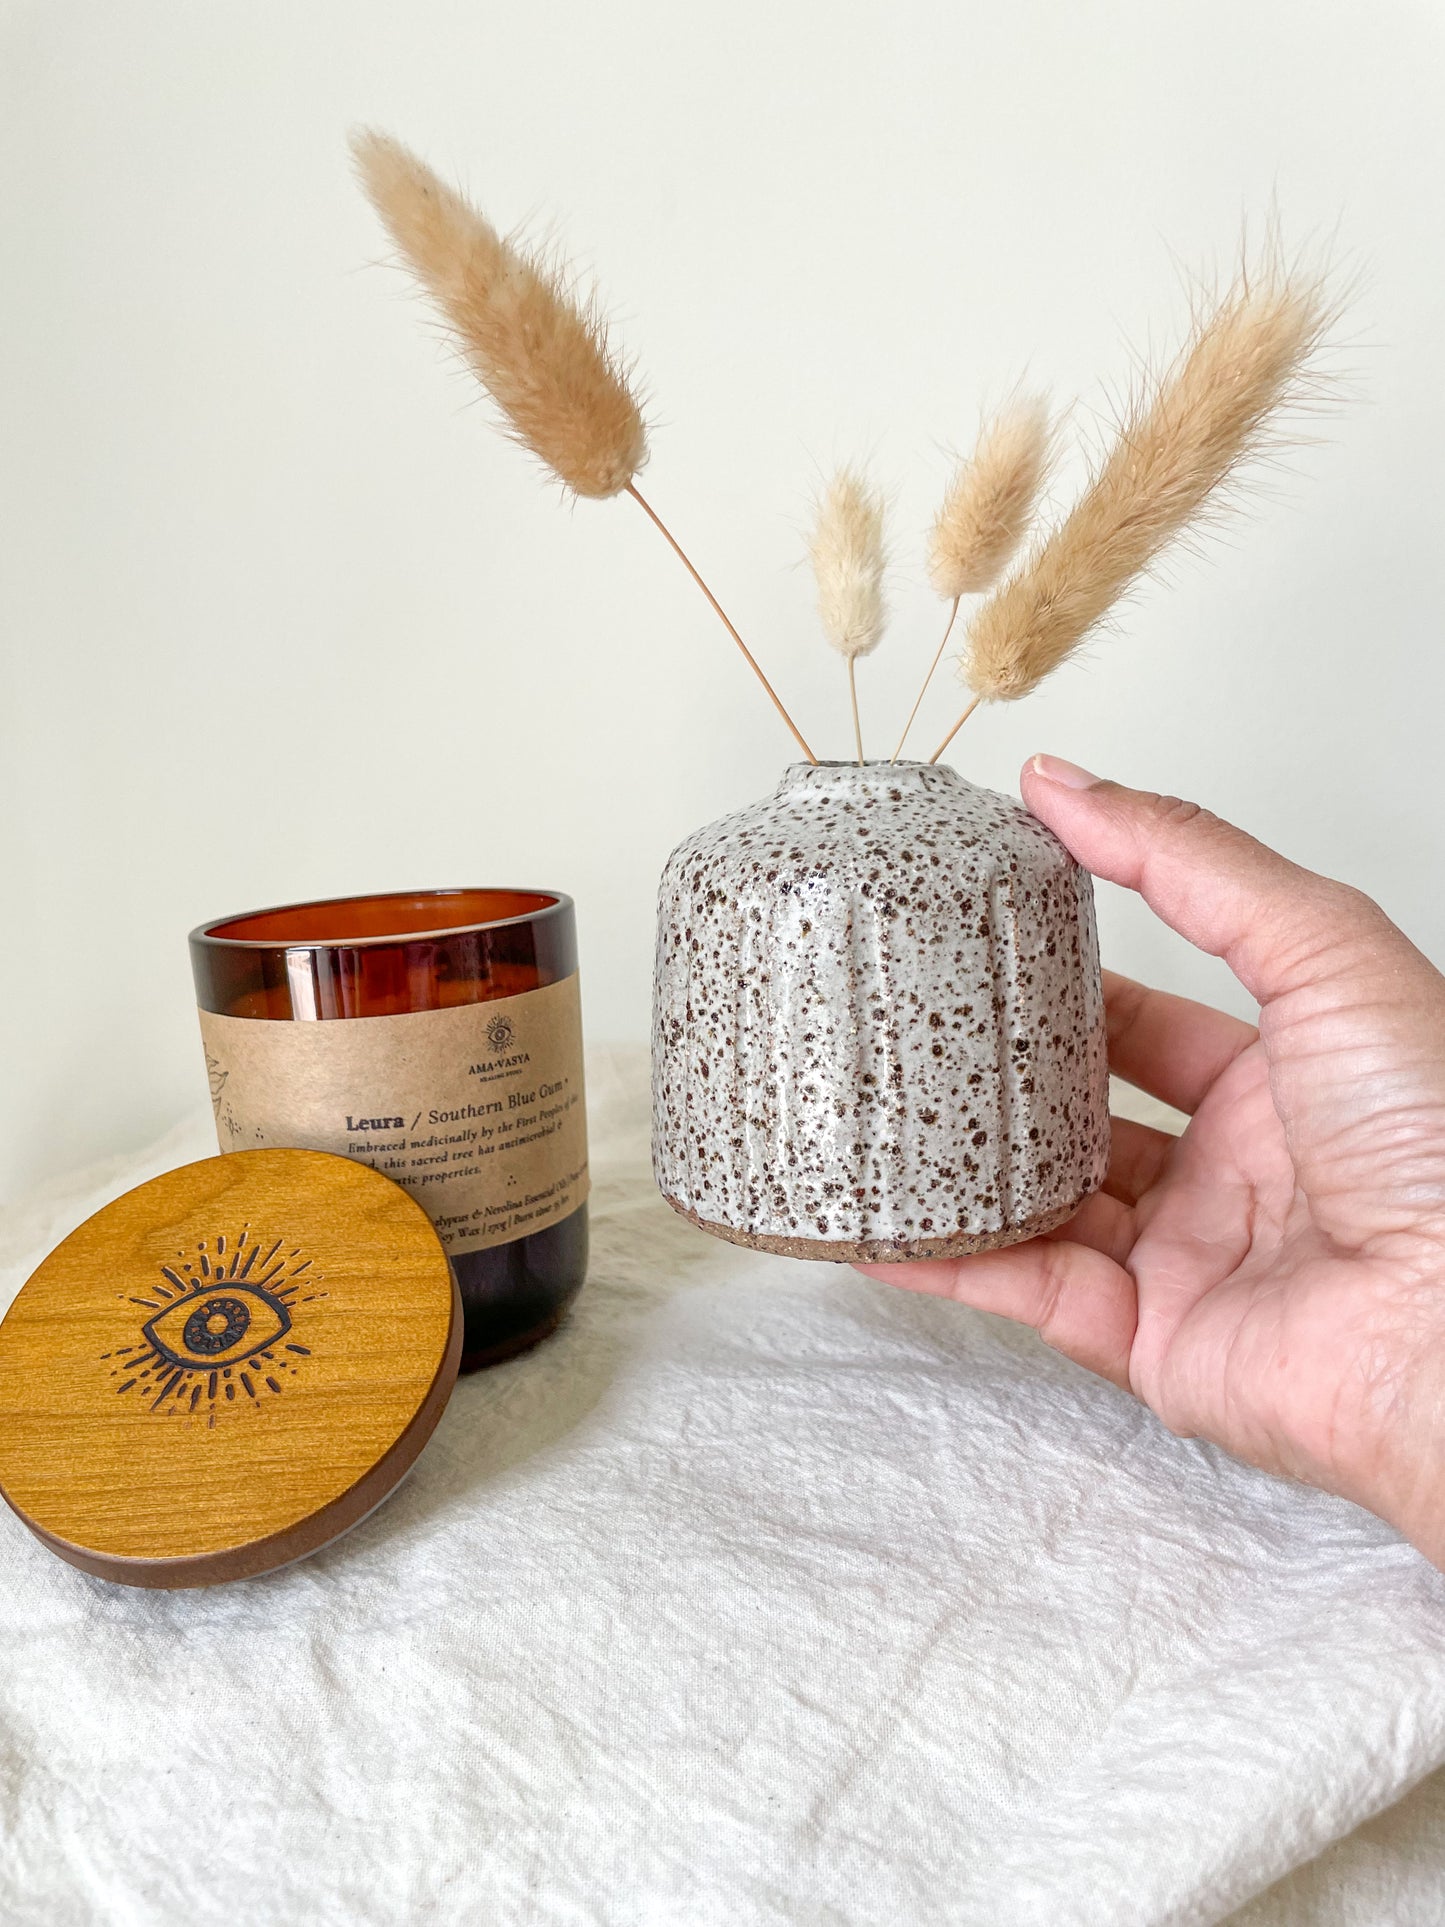 Leura soywax candle and Hazel small handmade ceramic vase with dried bunny tails in it. Small ceramic vase is held in a hand